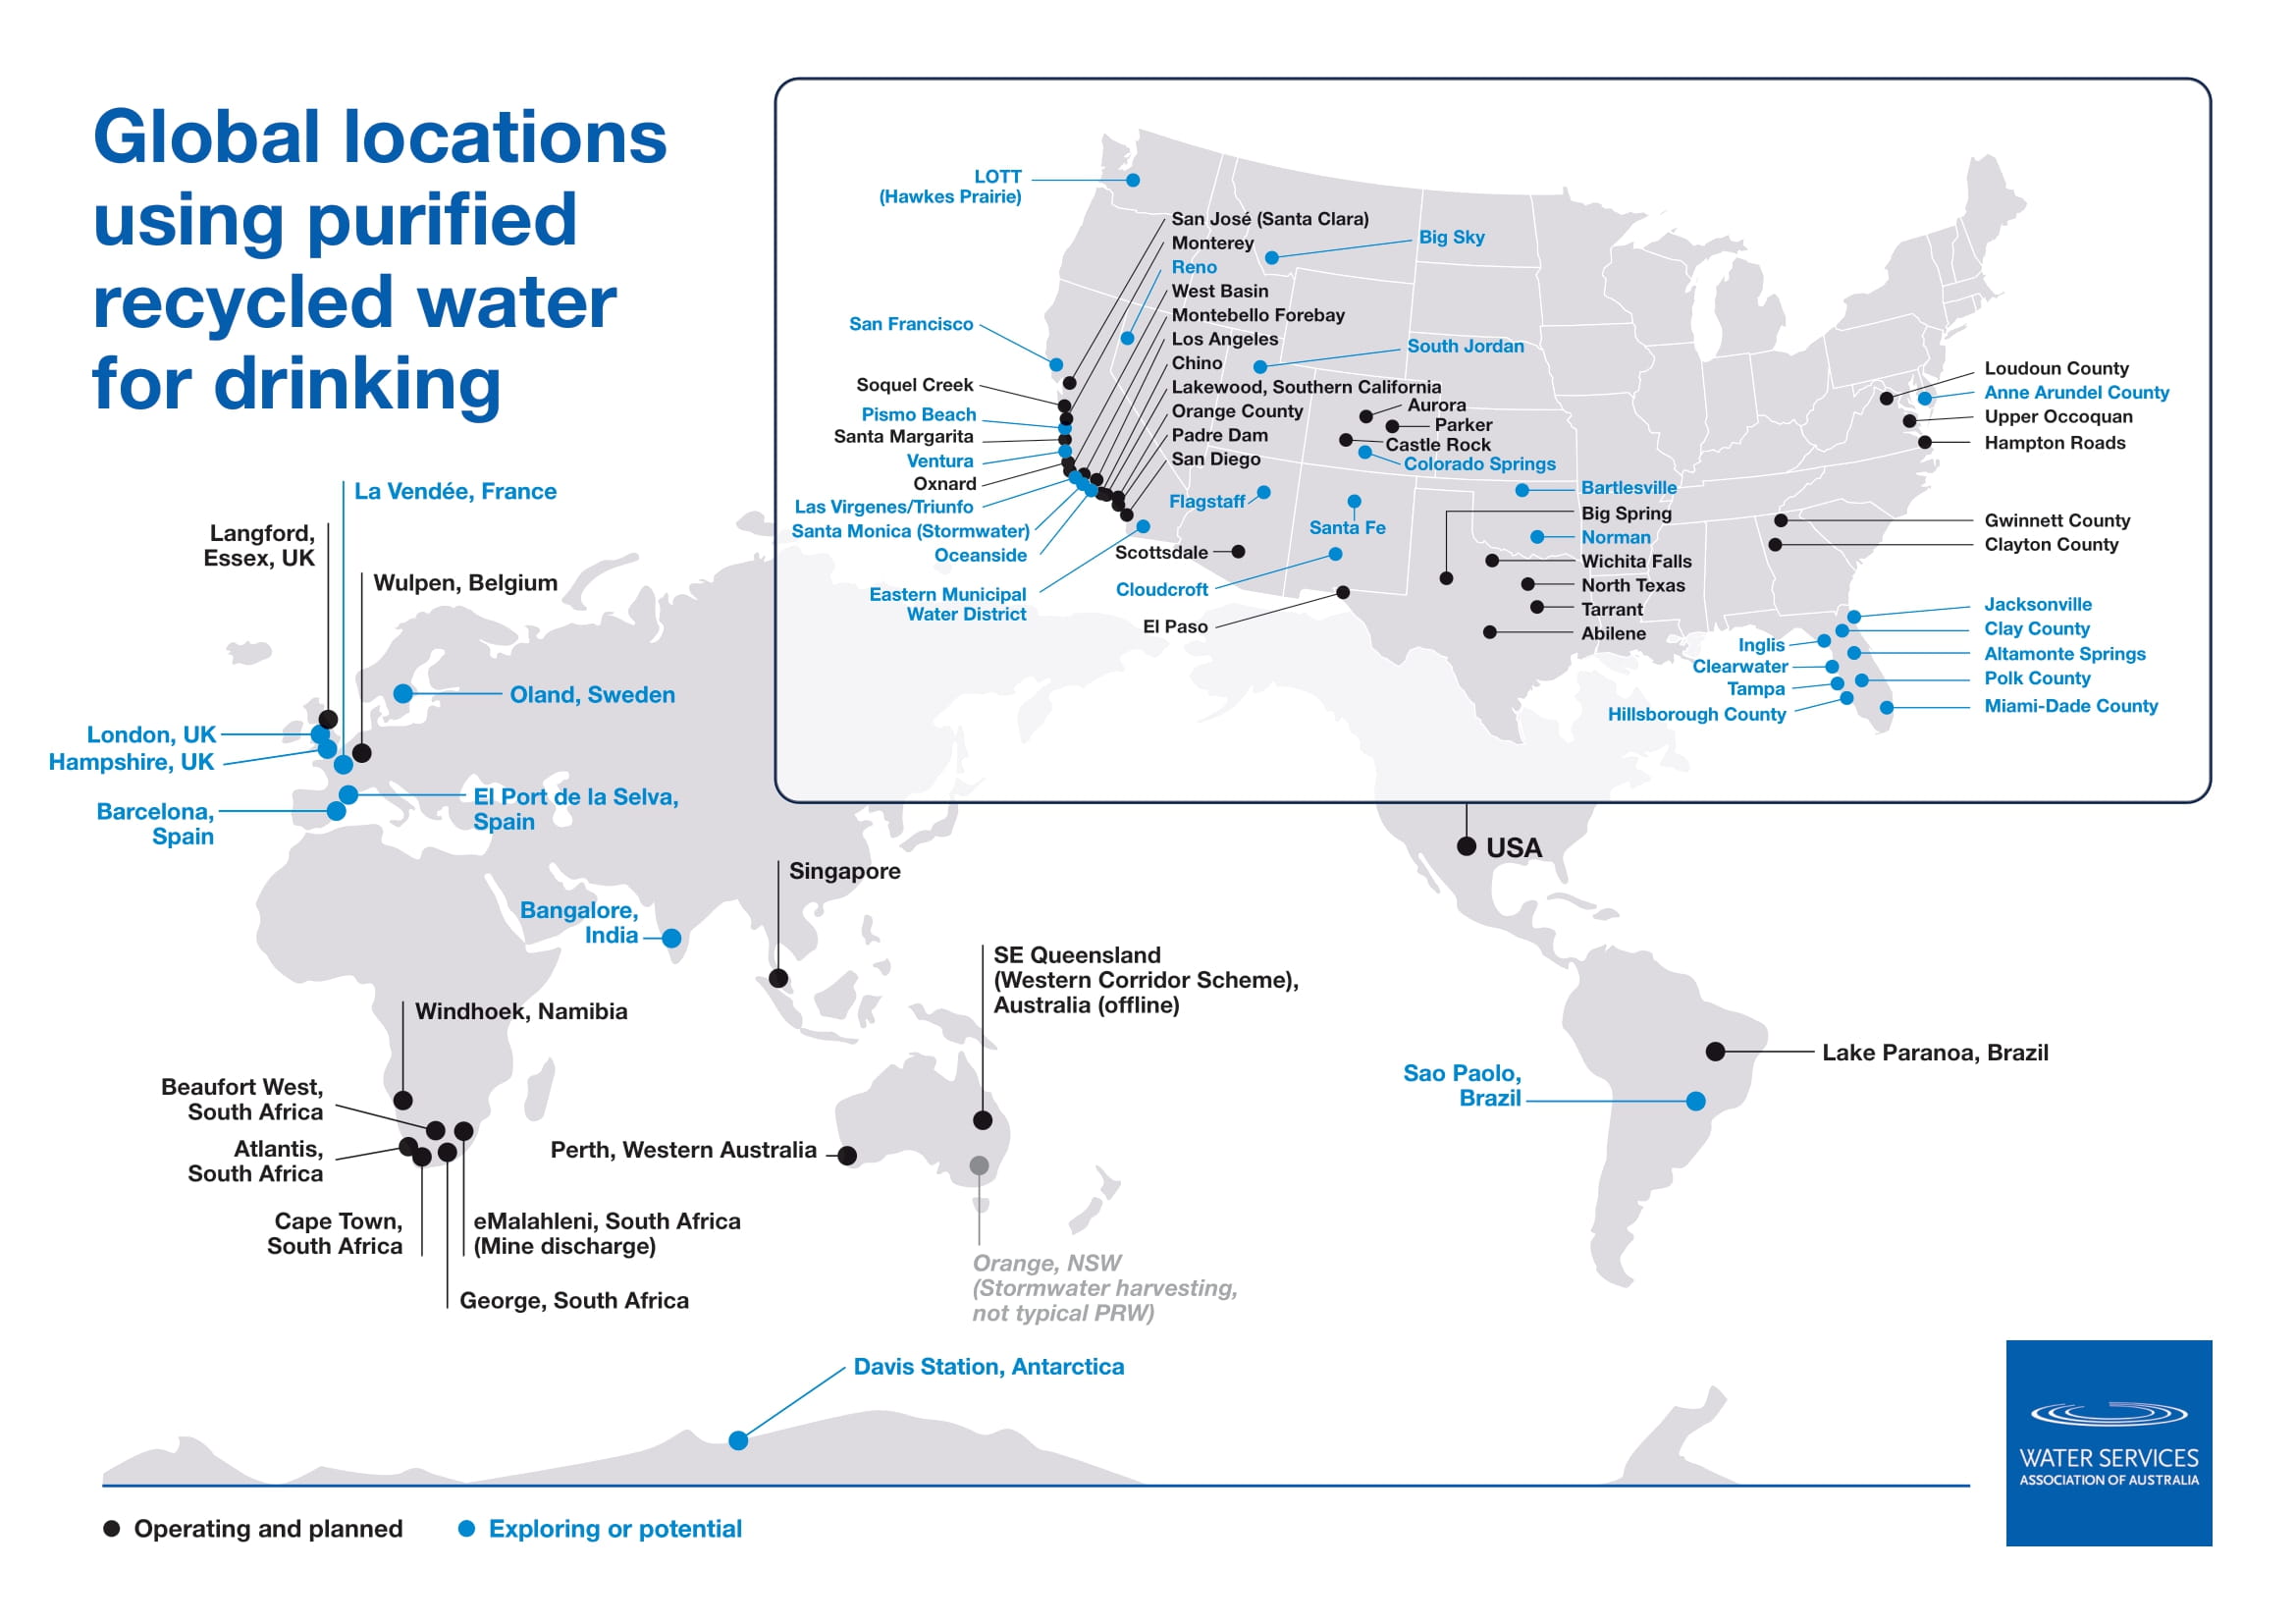 Global locations using purified recycled water for drinking